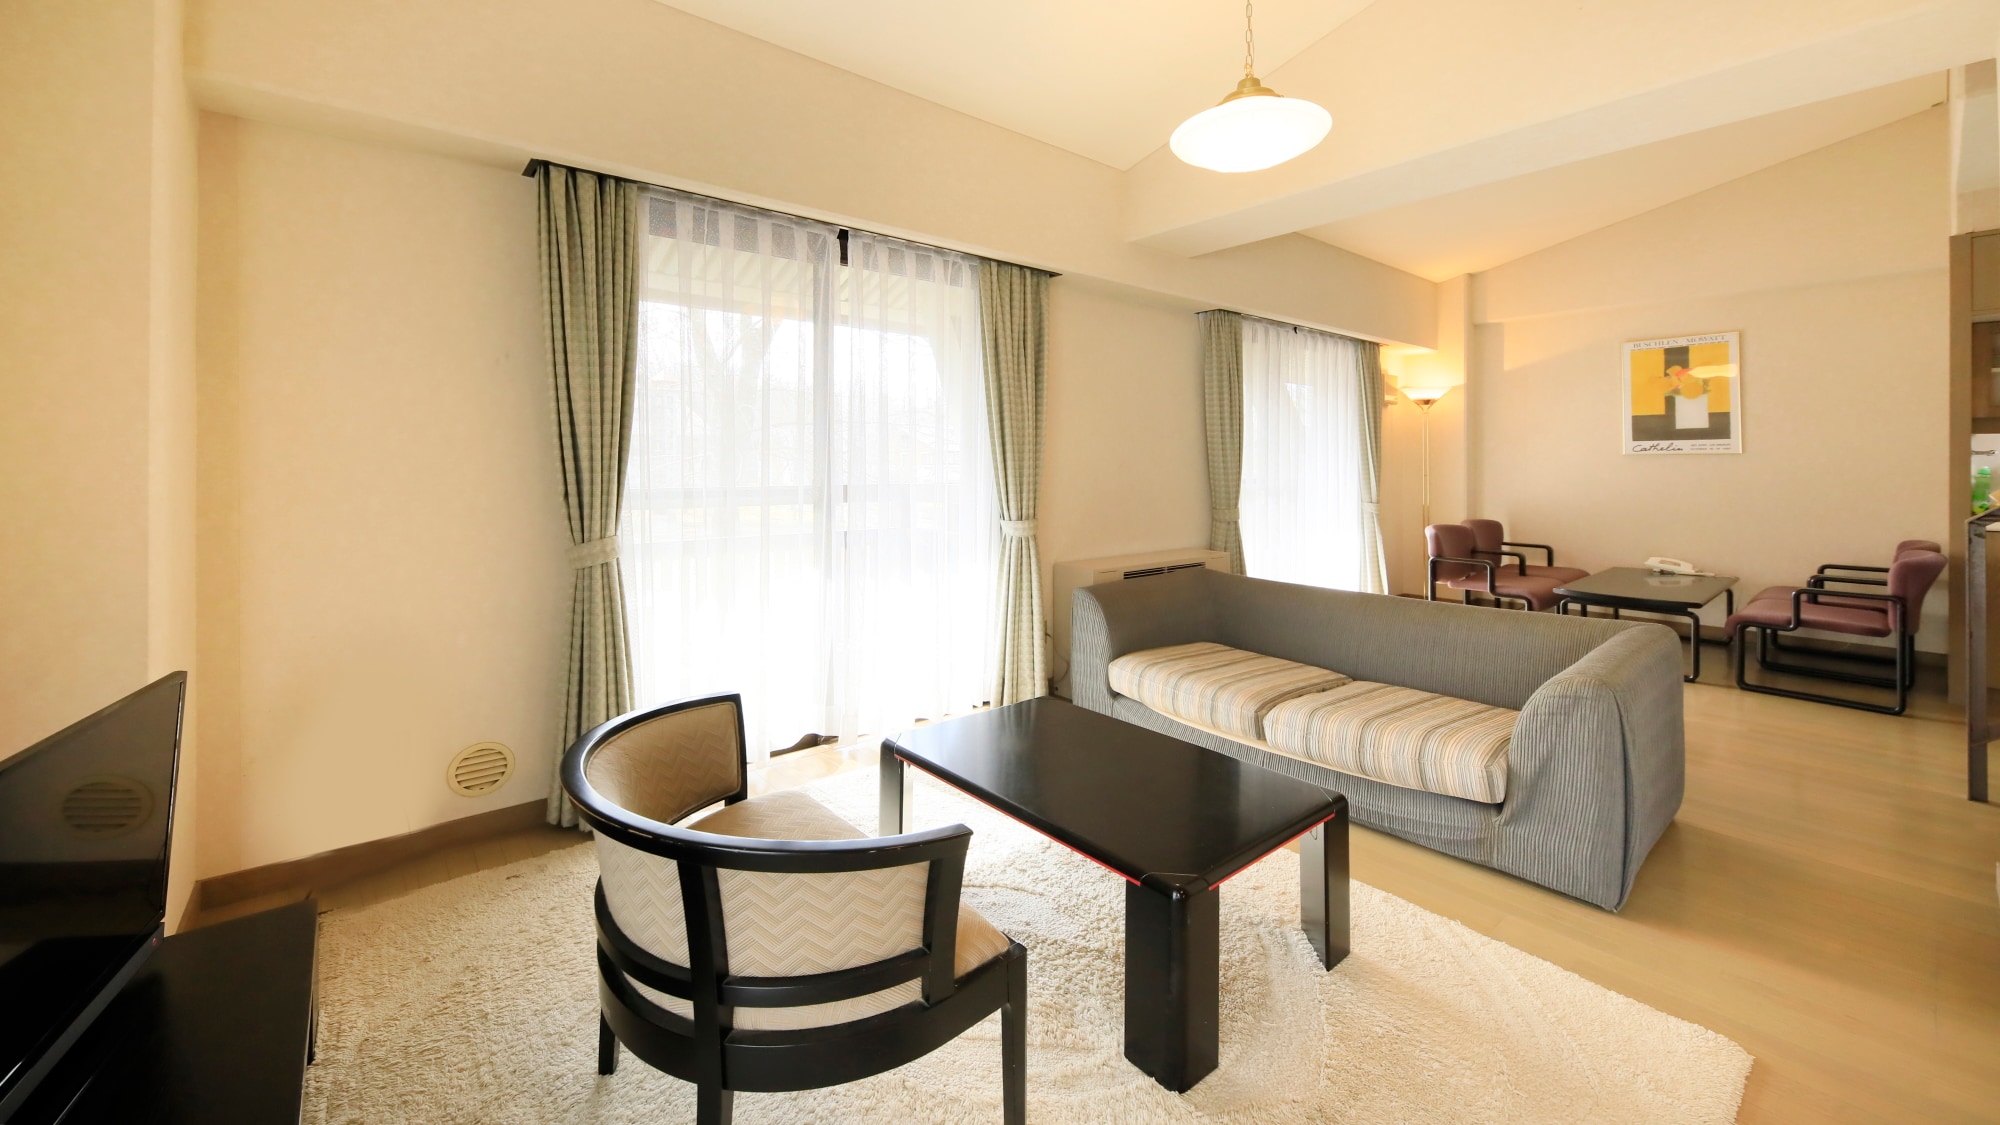 [East West Building 2nd floor] You can relax in a spacious room